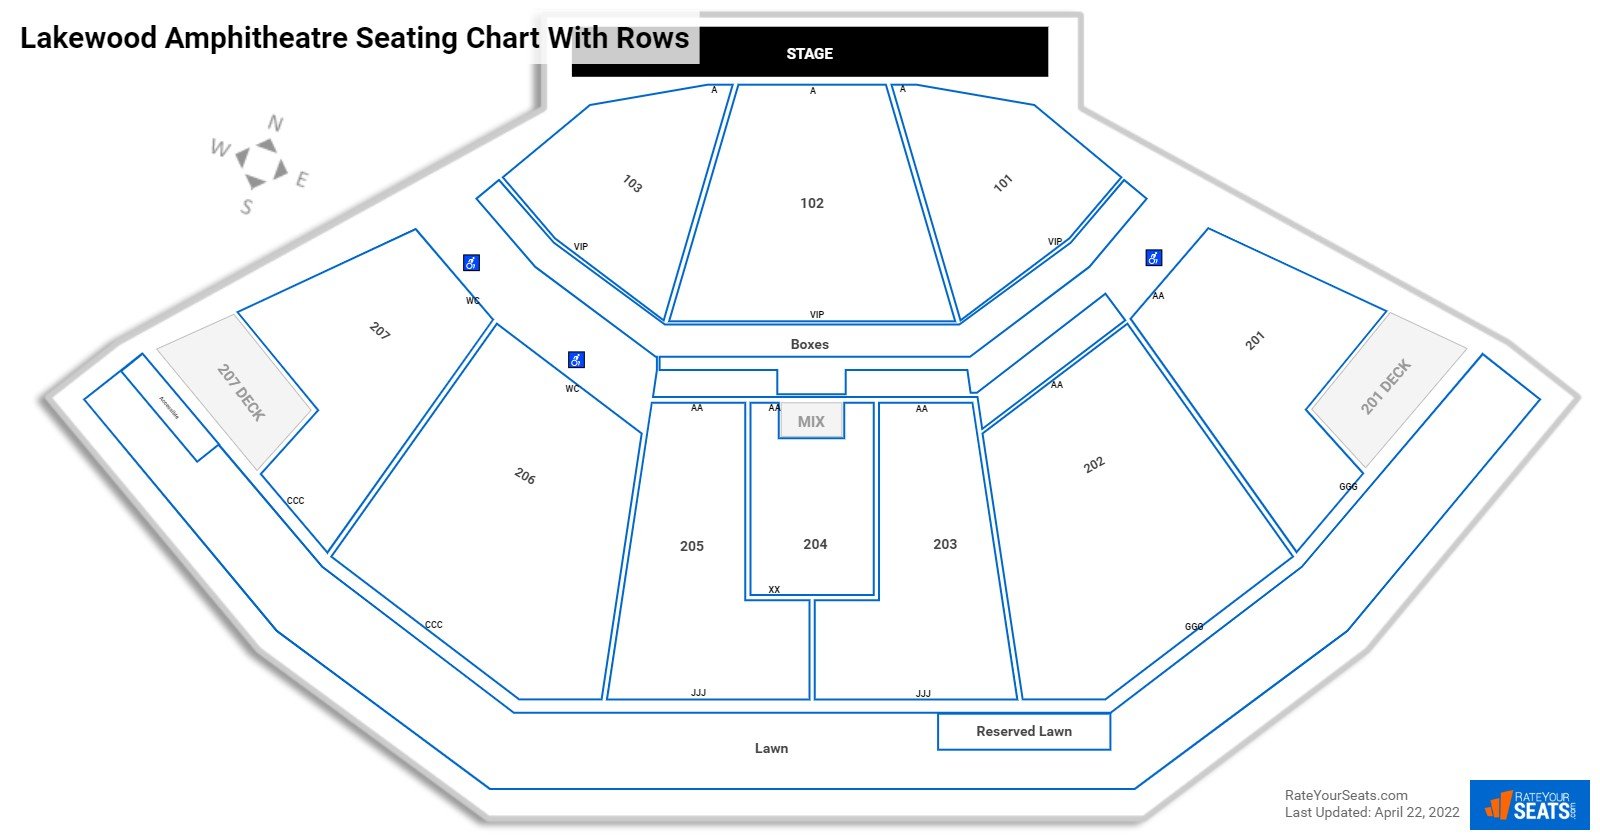 Lakewood Amphitheatre seating chart with row numbers